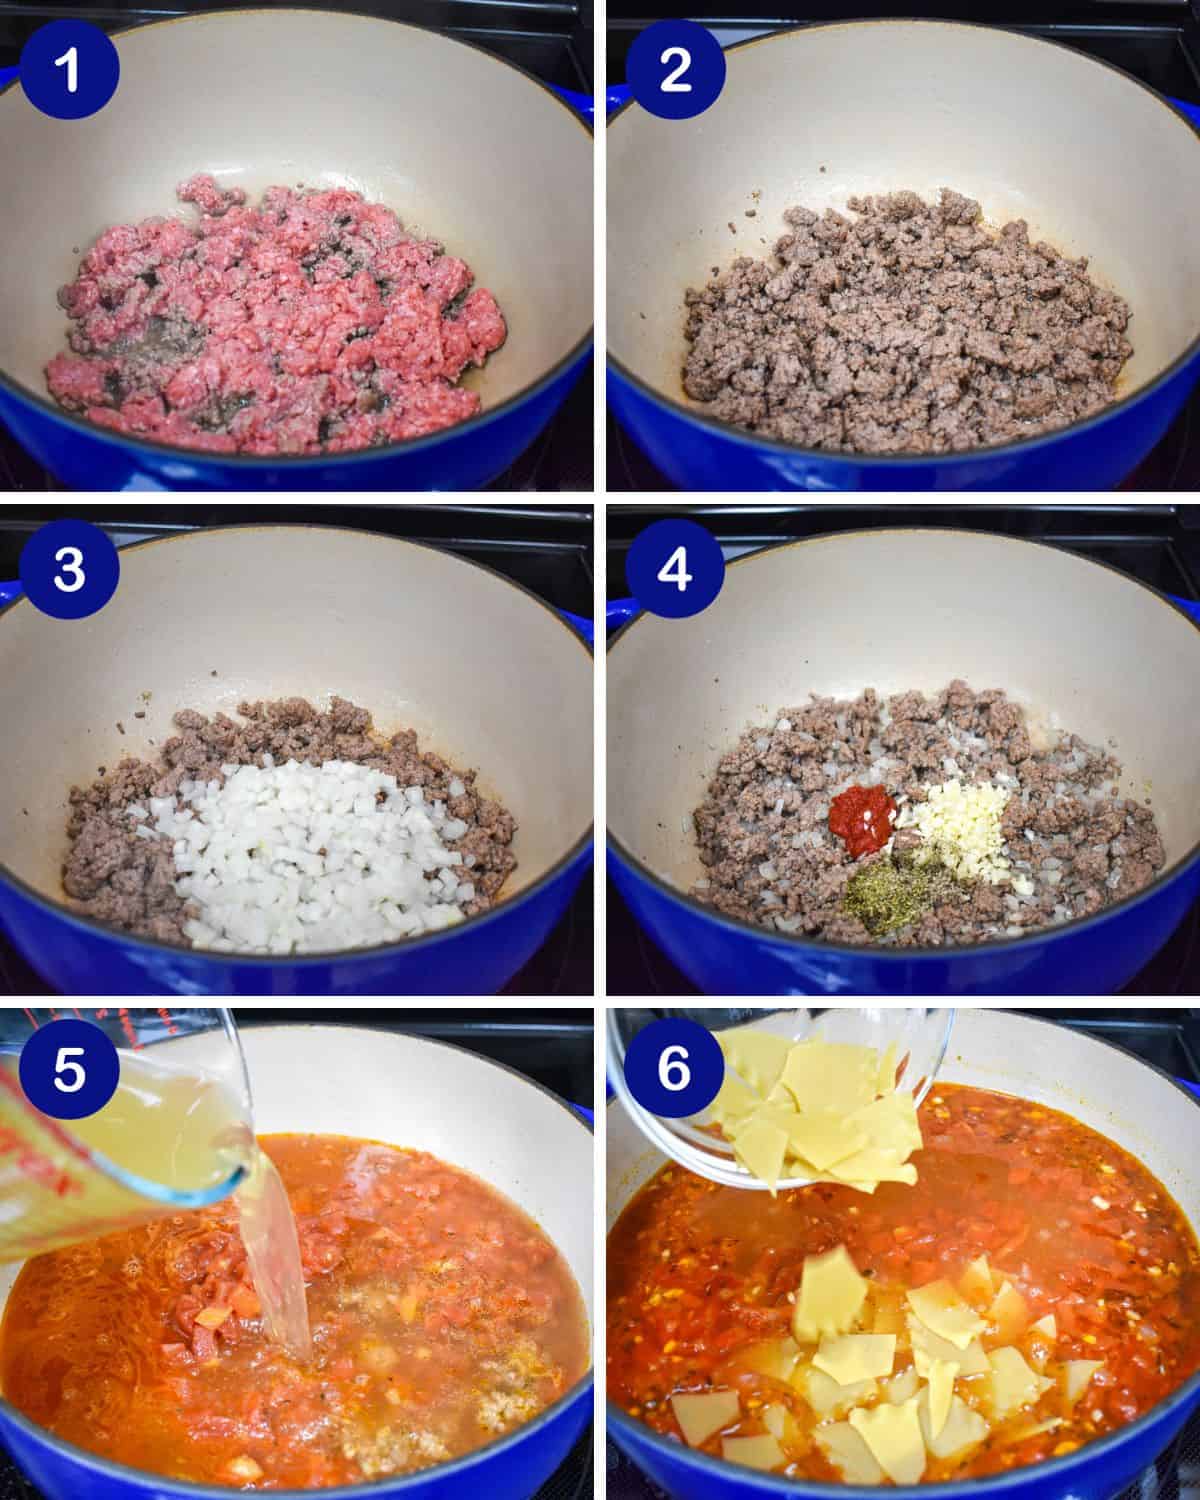 A collage of six images showing the steps of making the soup in a large blue and white pot.